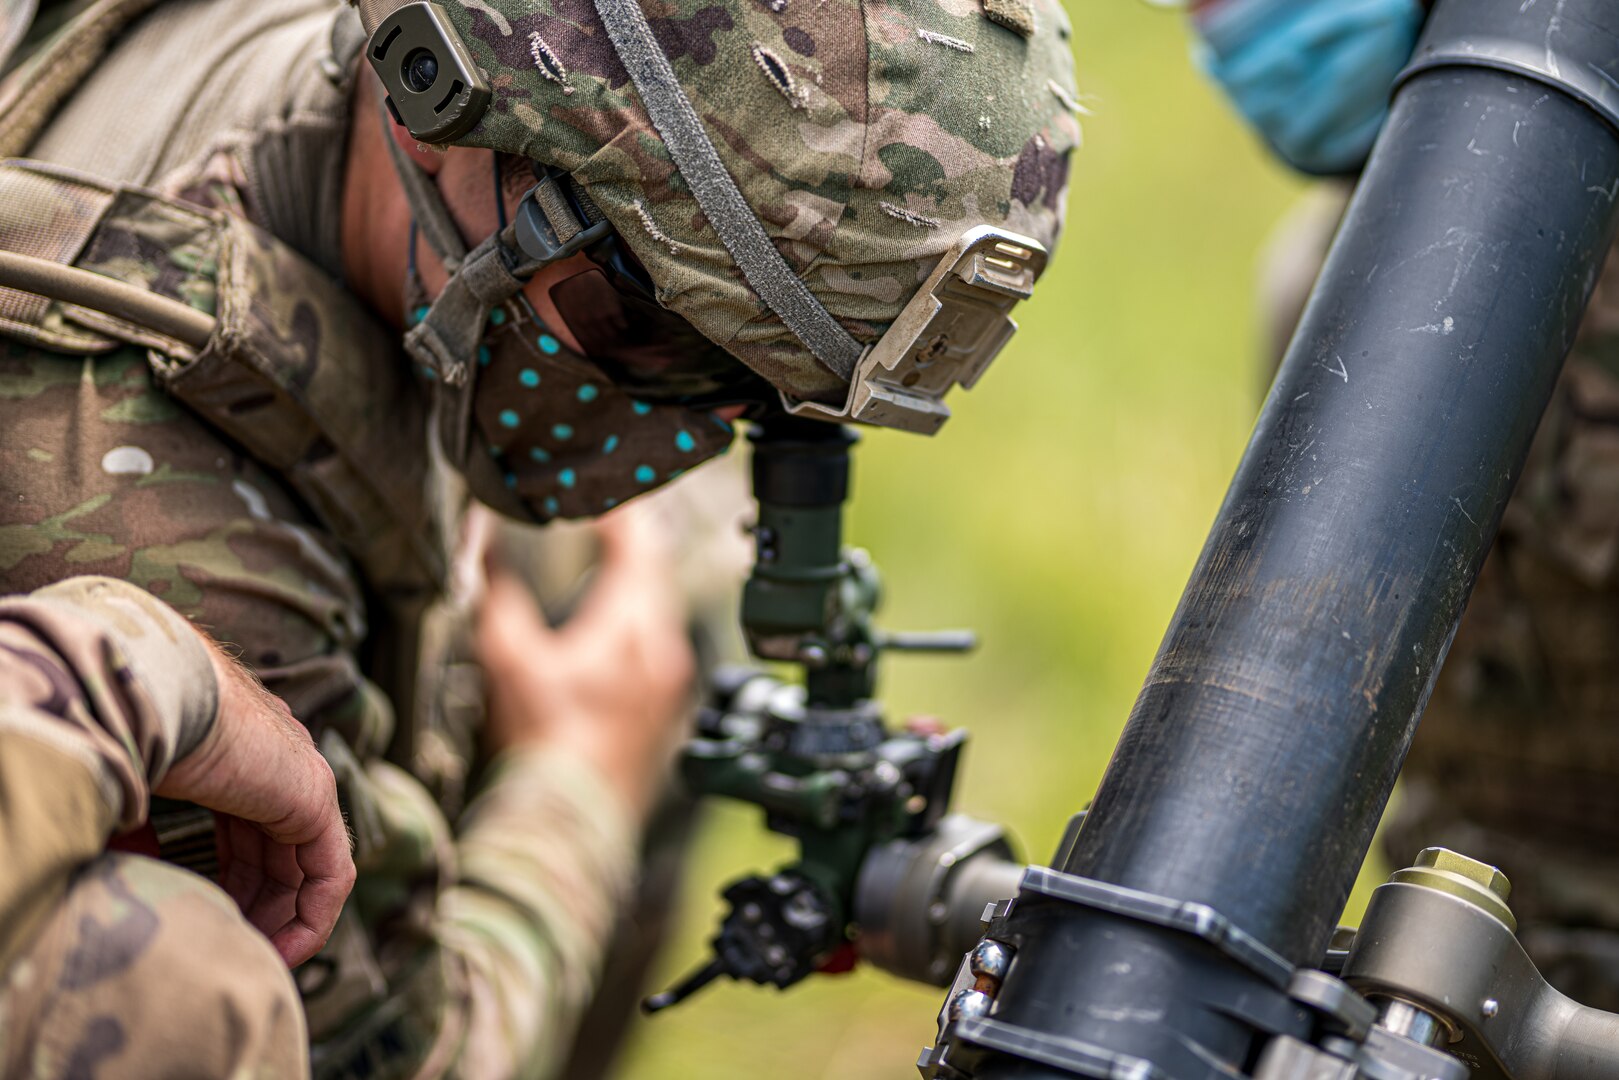 During an integrated live-fire, Indiana National Guard Soldiers with the 76th Infantry Brigade Combat Team’s 151st Infantry Regiment completed mortar table five, a practice qualification exercise, at Camp Atterbury, Edinburgh, Indiana, July 21, 2020.